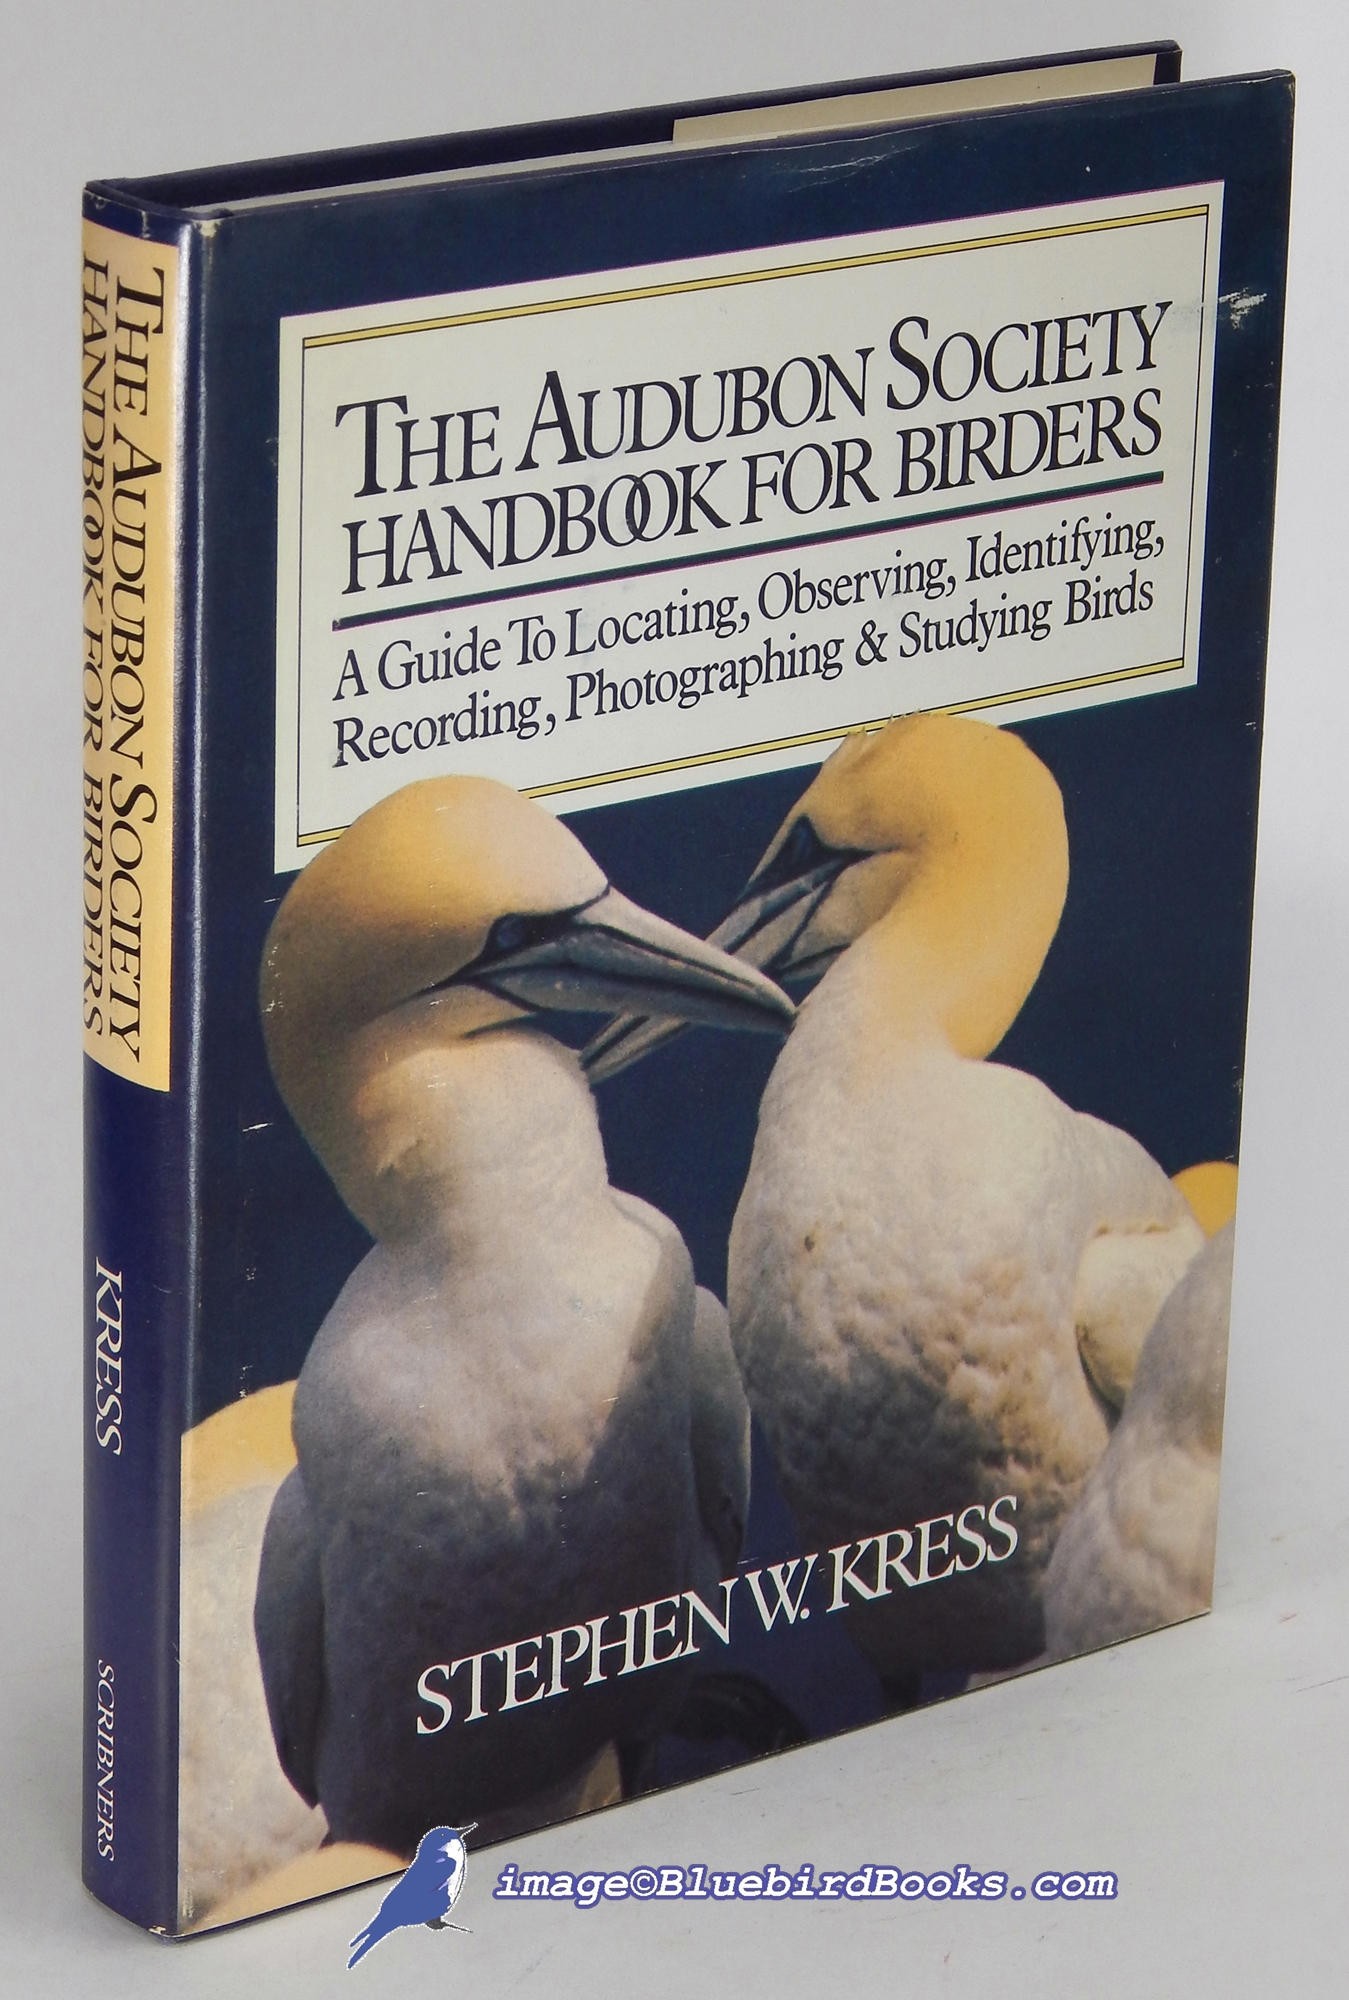 KRESS, STEPHEN W. - The Audubon Society Handbook for Birders: A Guide to Locating, Observing, Identifying, Recording, Photographing & Studying Birds